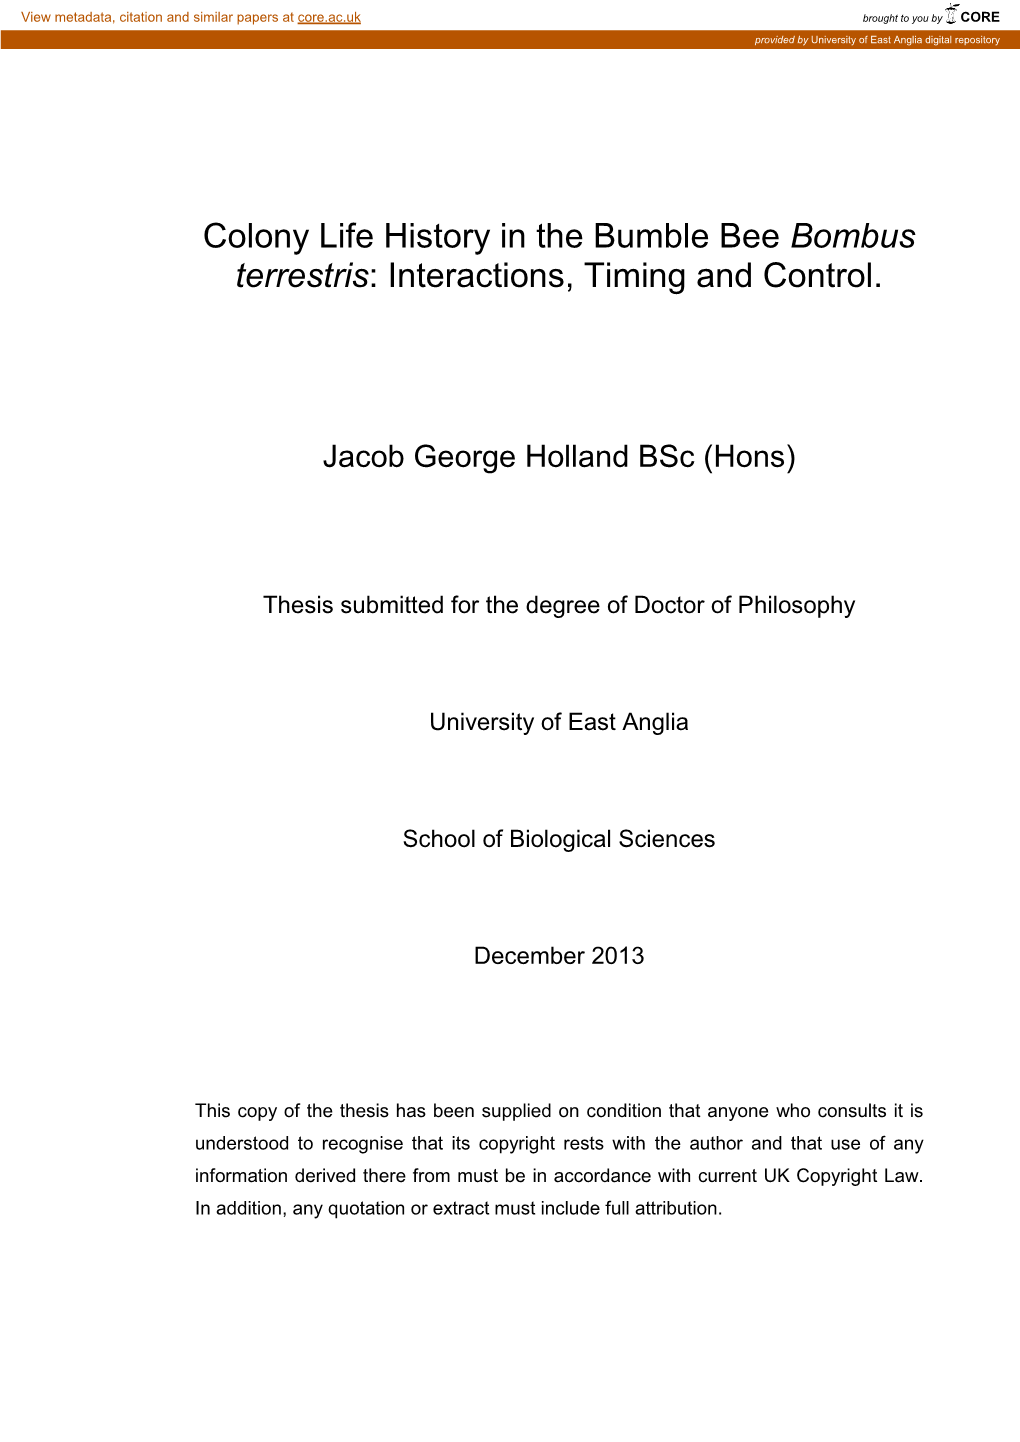 Colony Life History in the Bumble Bee Bombus Terrestris: Interactions, Timing and Control